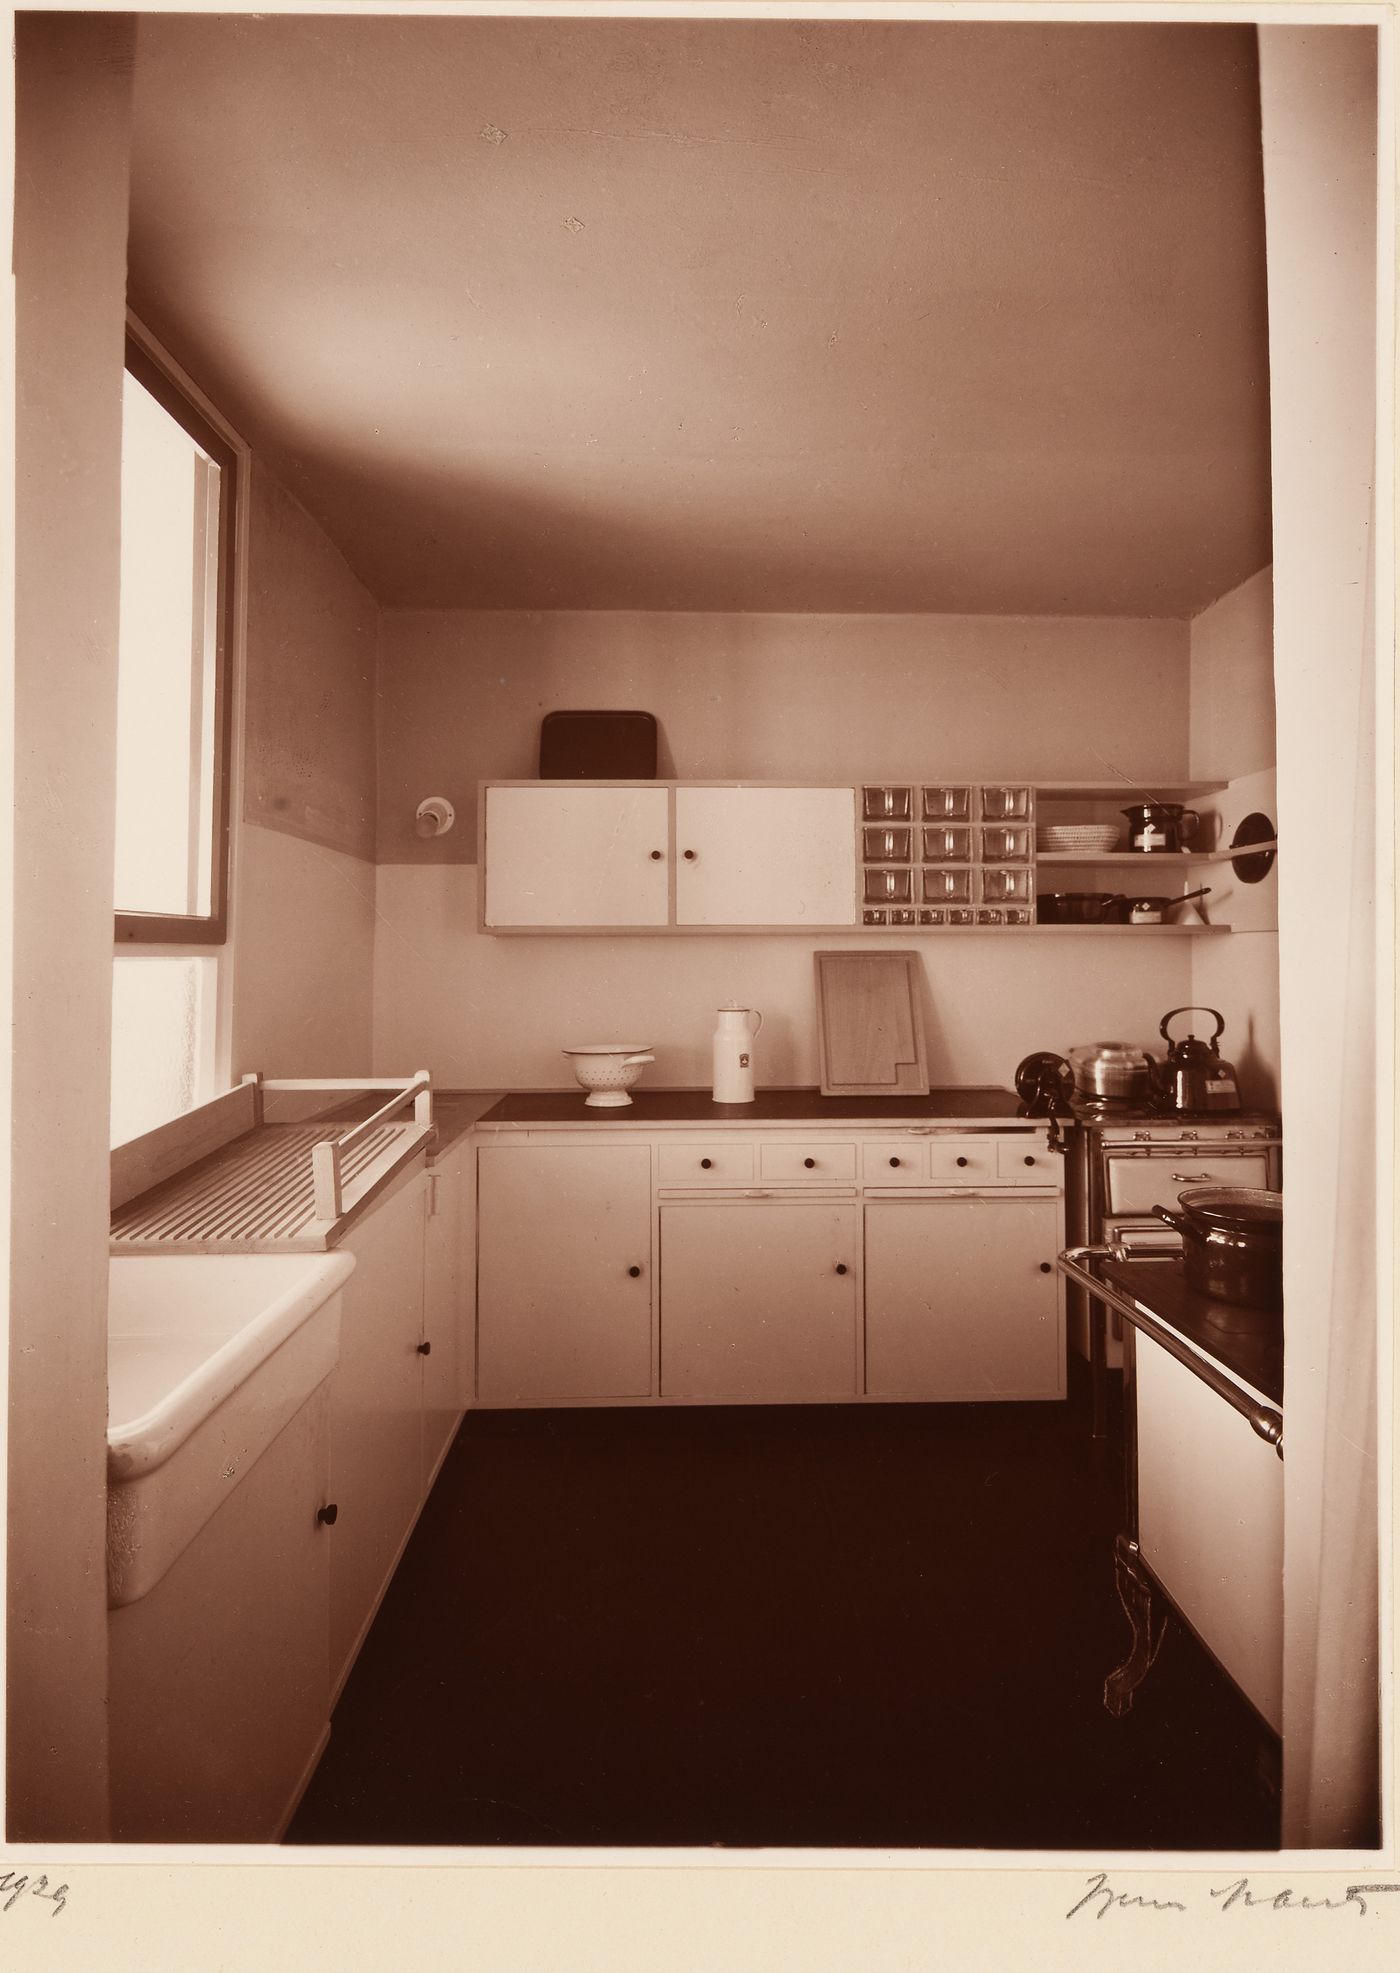 Interior, view of unidentified kitchen, illumination from window at left